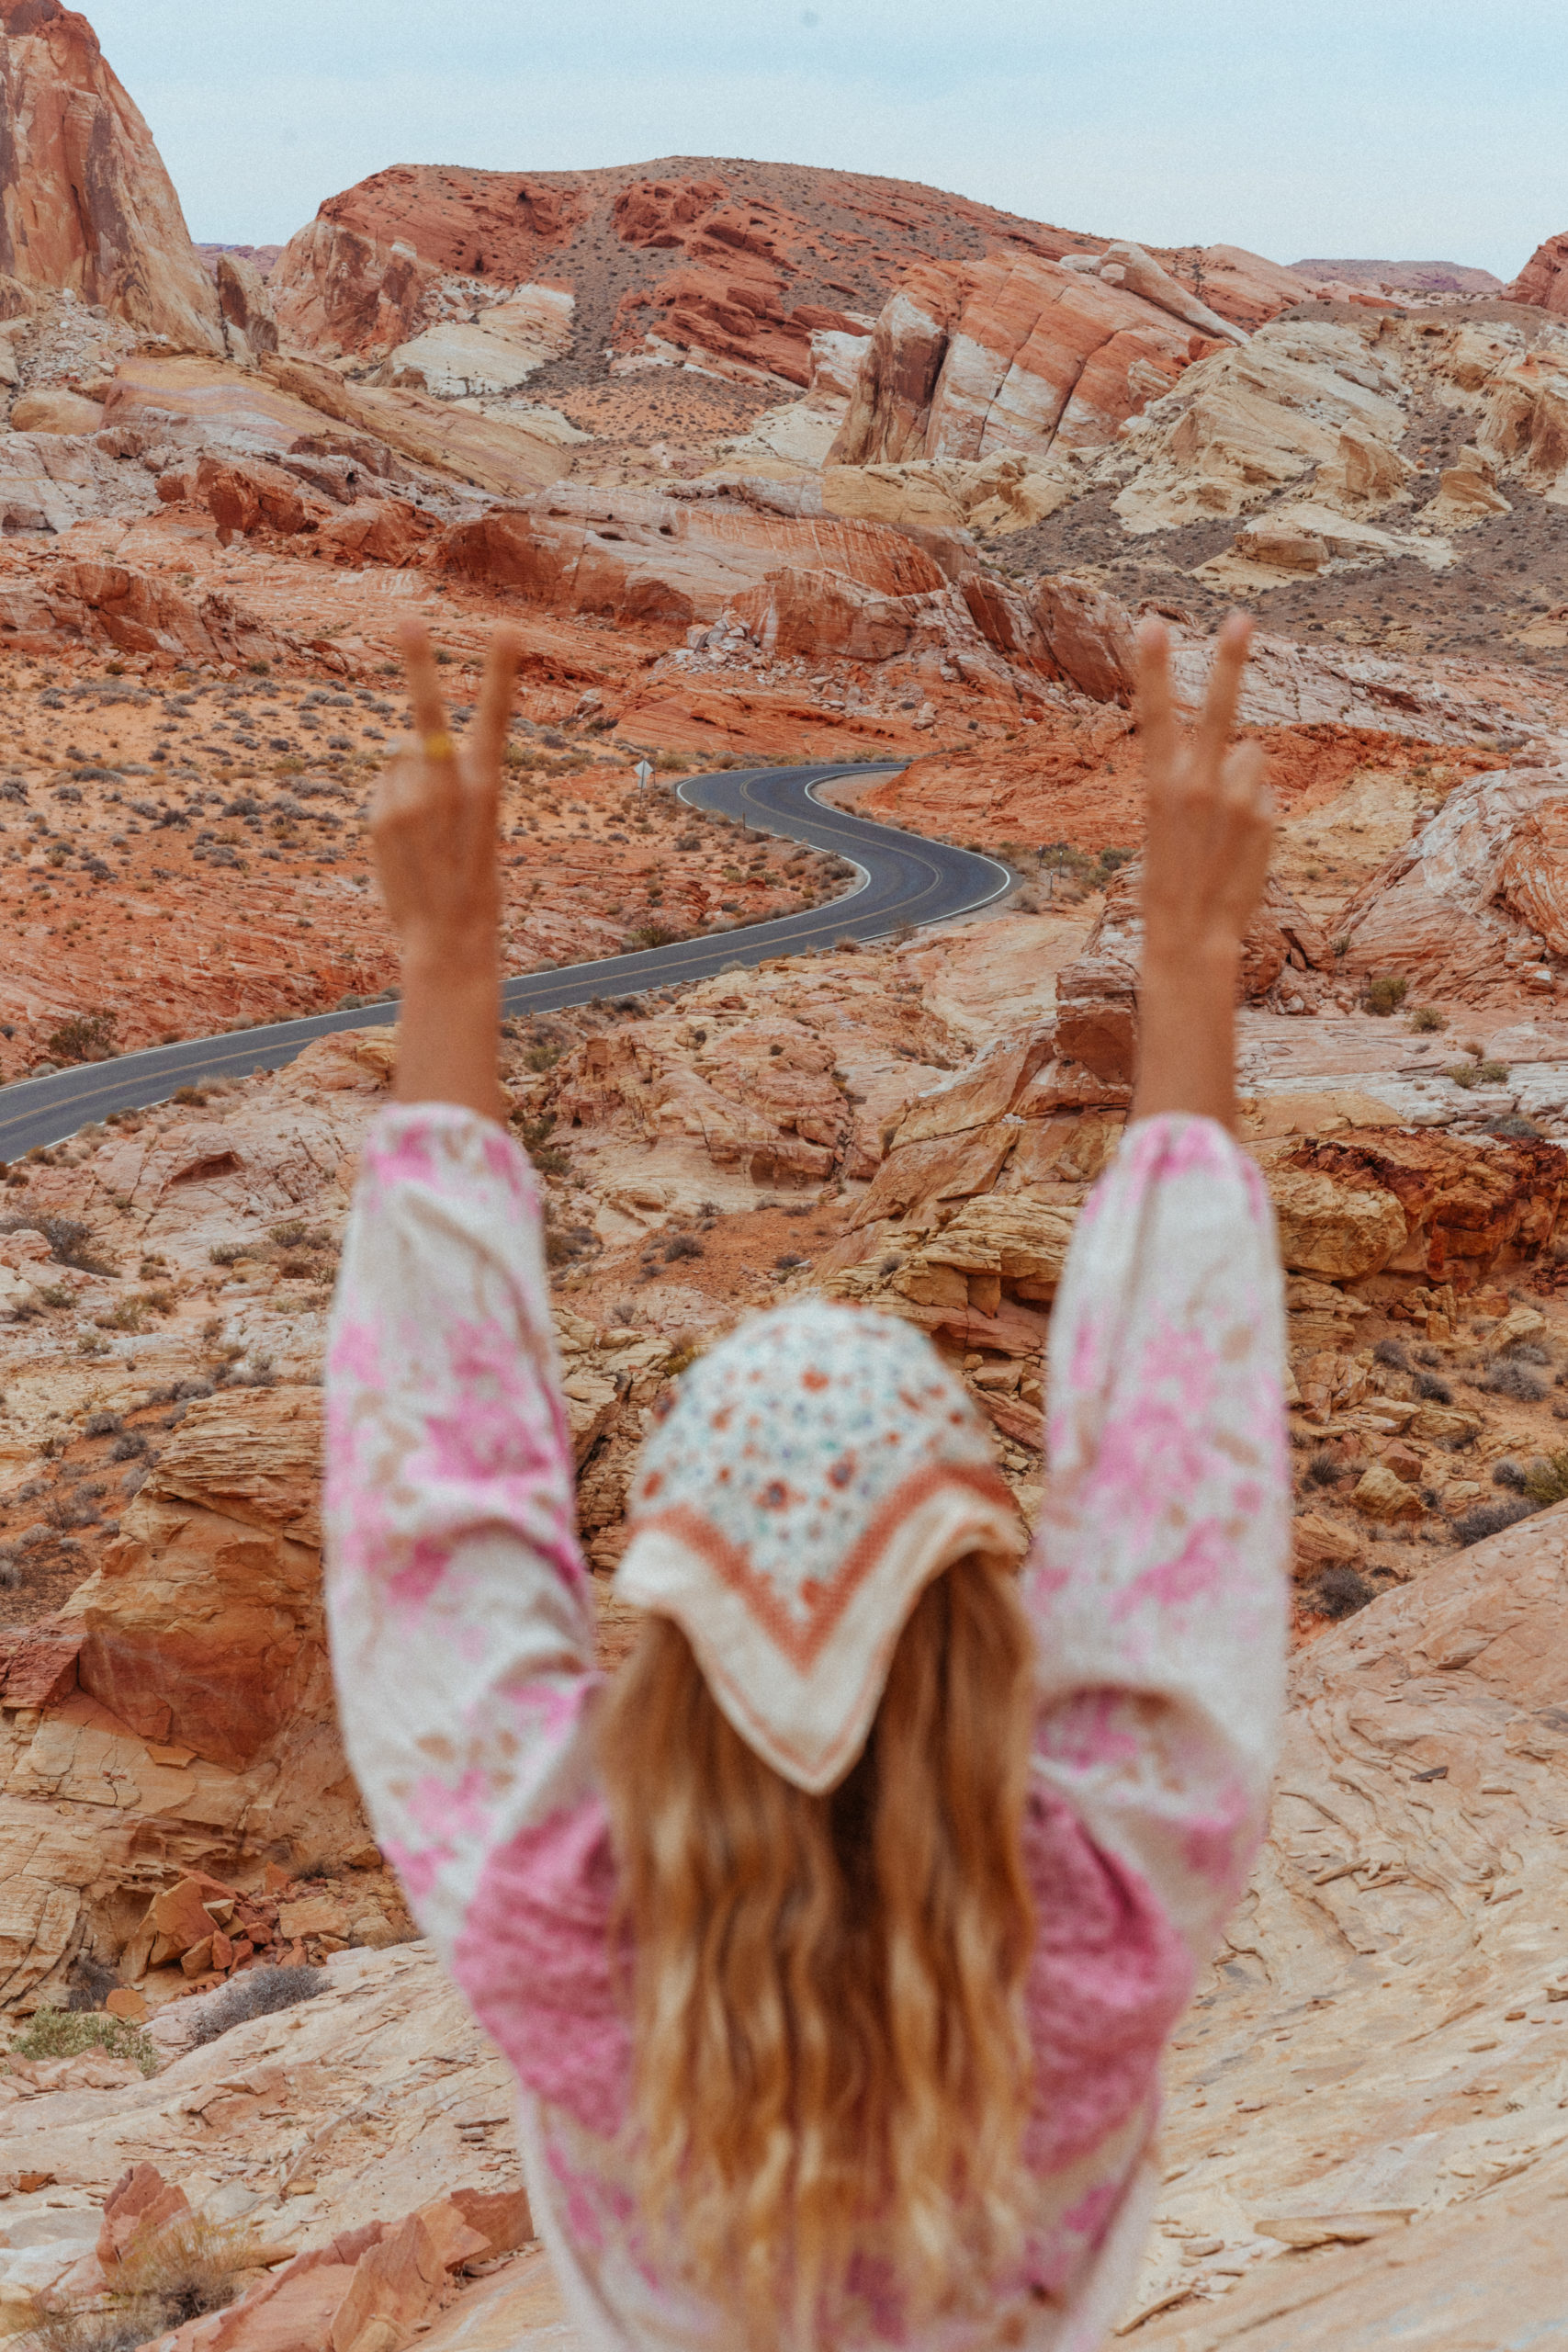 Sarah holding up arms overlooking the Valley of Fire Park